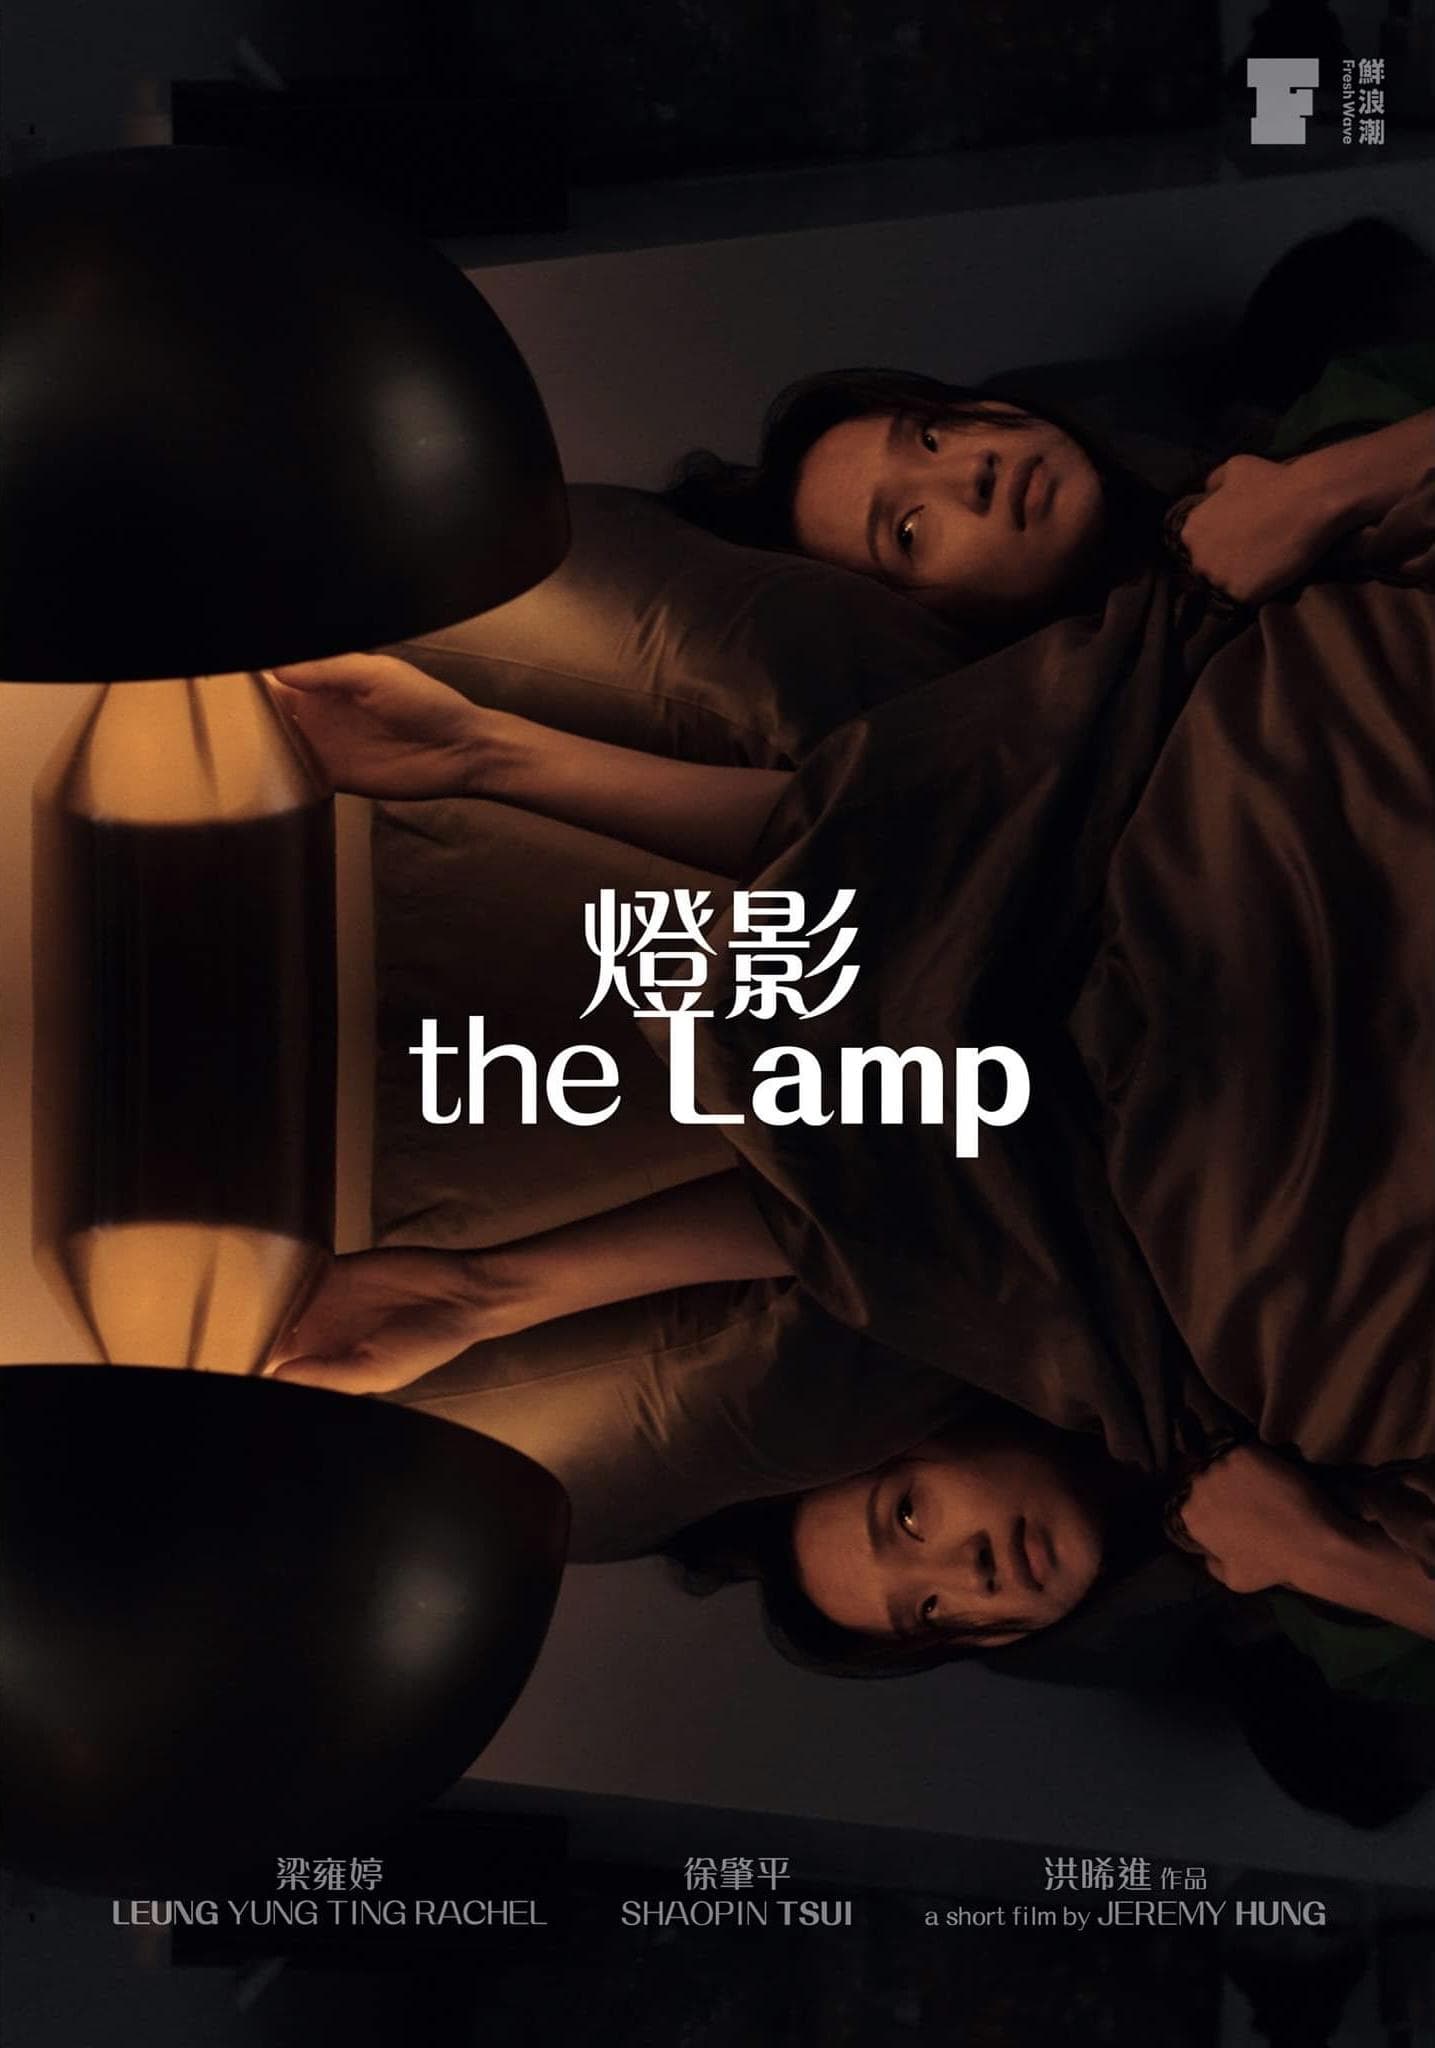 The Lamp